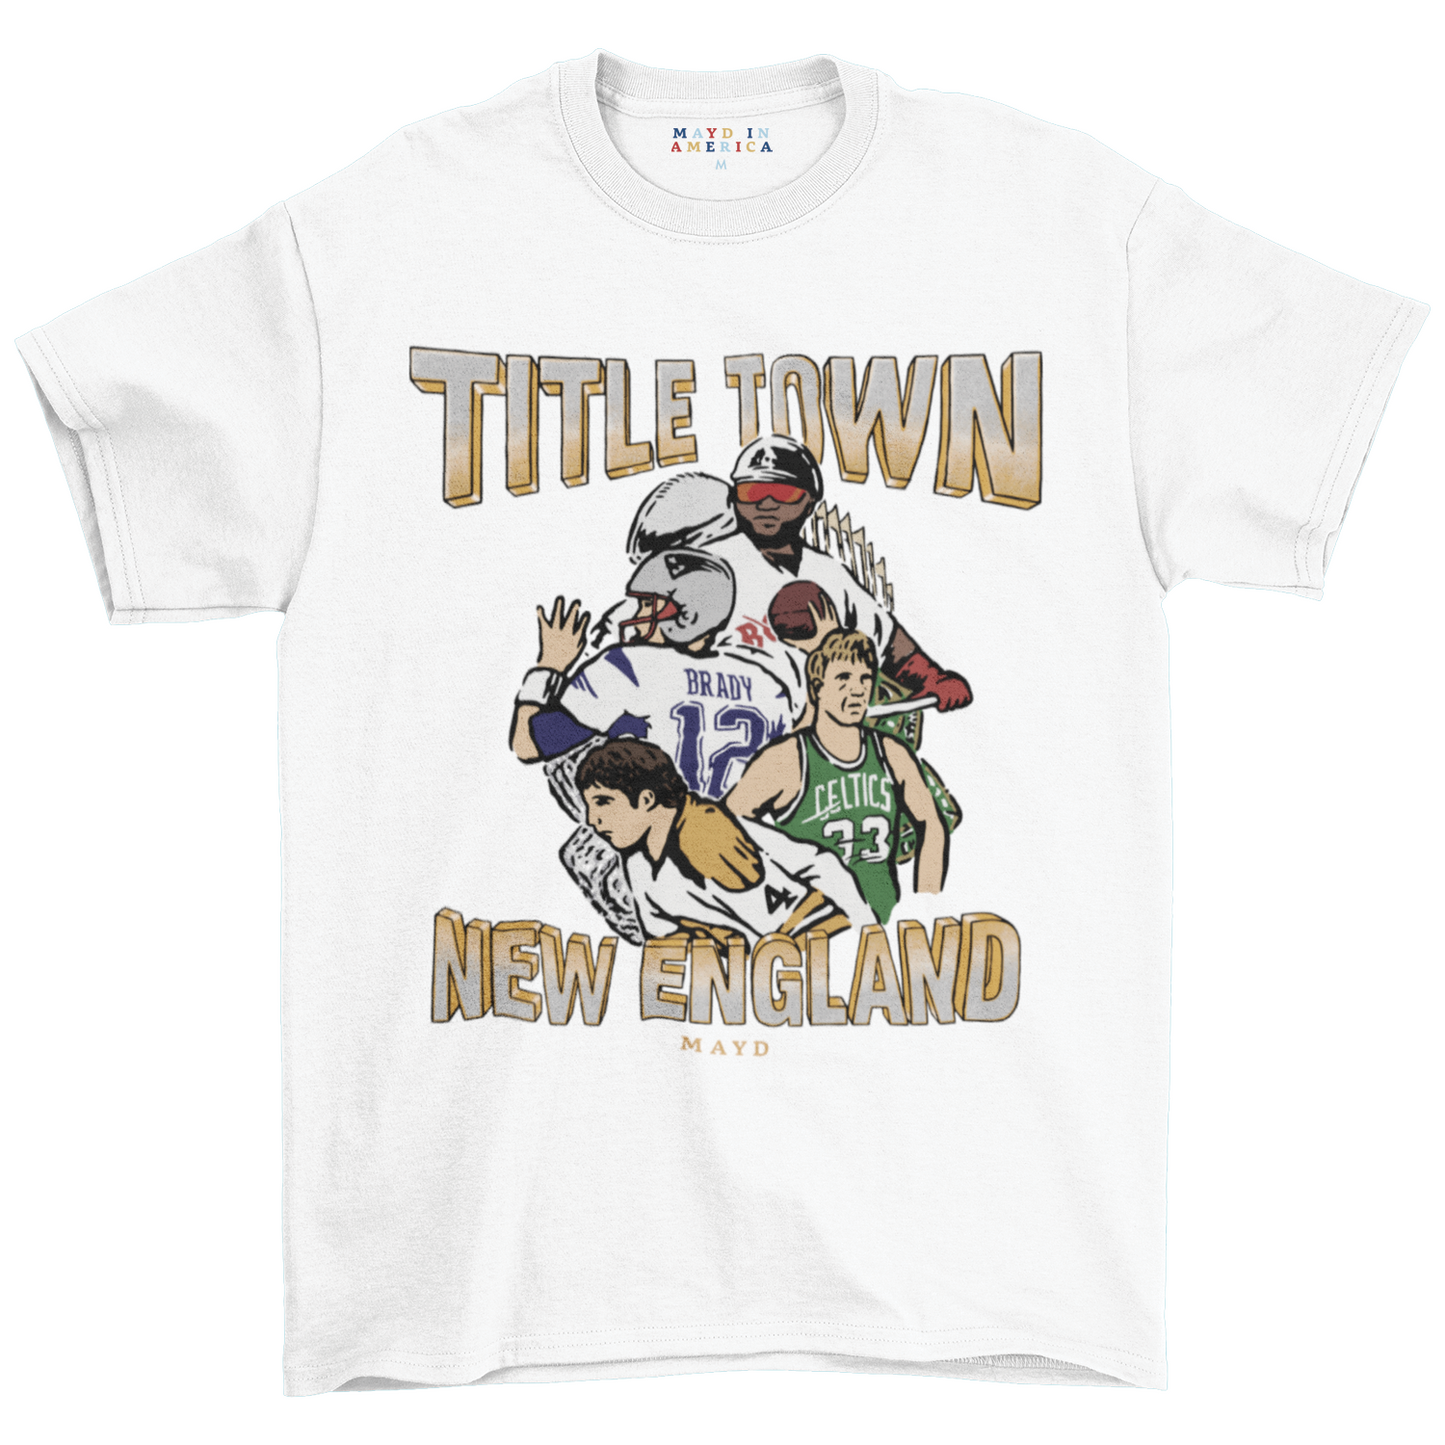 Title Town Short Sleeves T Shirts Unisex | T Shirts | MAYD in America XL / White